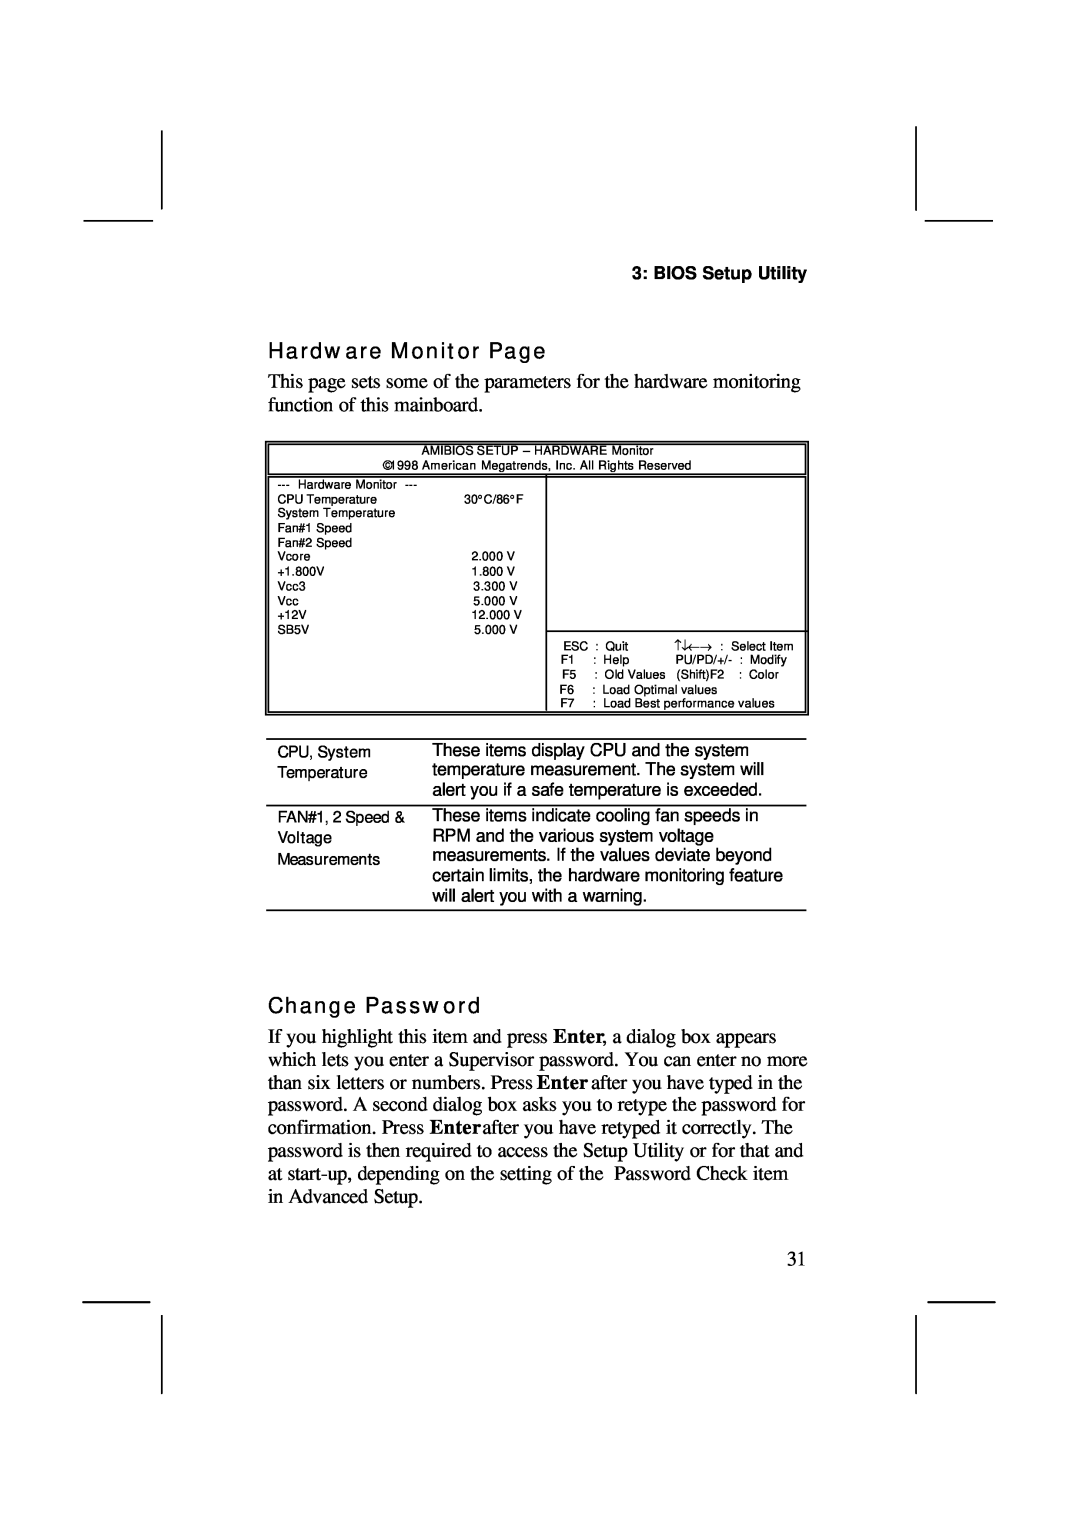 IBM MS7308D/E, V1.6 S63X/JUNE 2000 Hardware Monitor Page, Change Password, These items display CPU and the system 